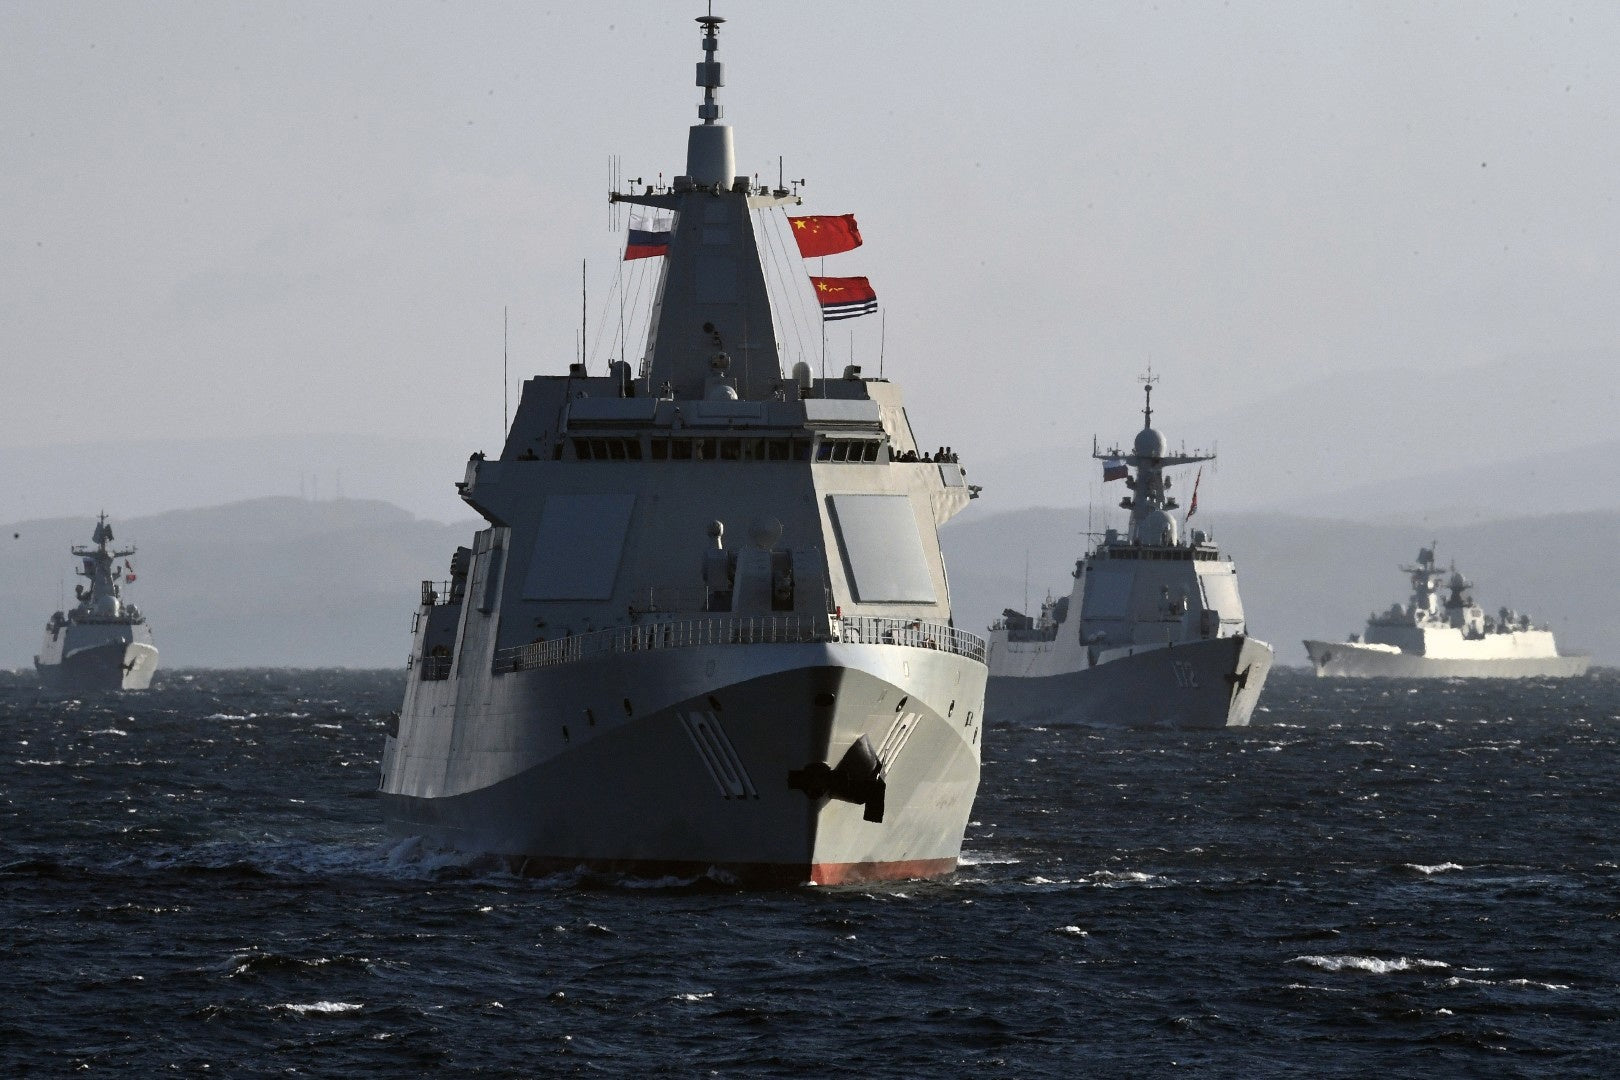 Russian frigates arrive in China in sign of 'close cooperation